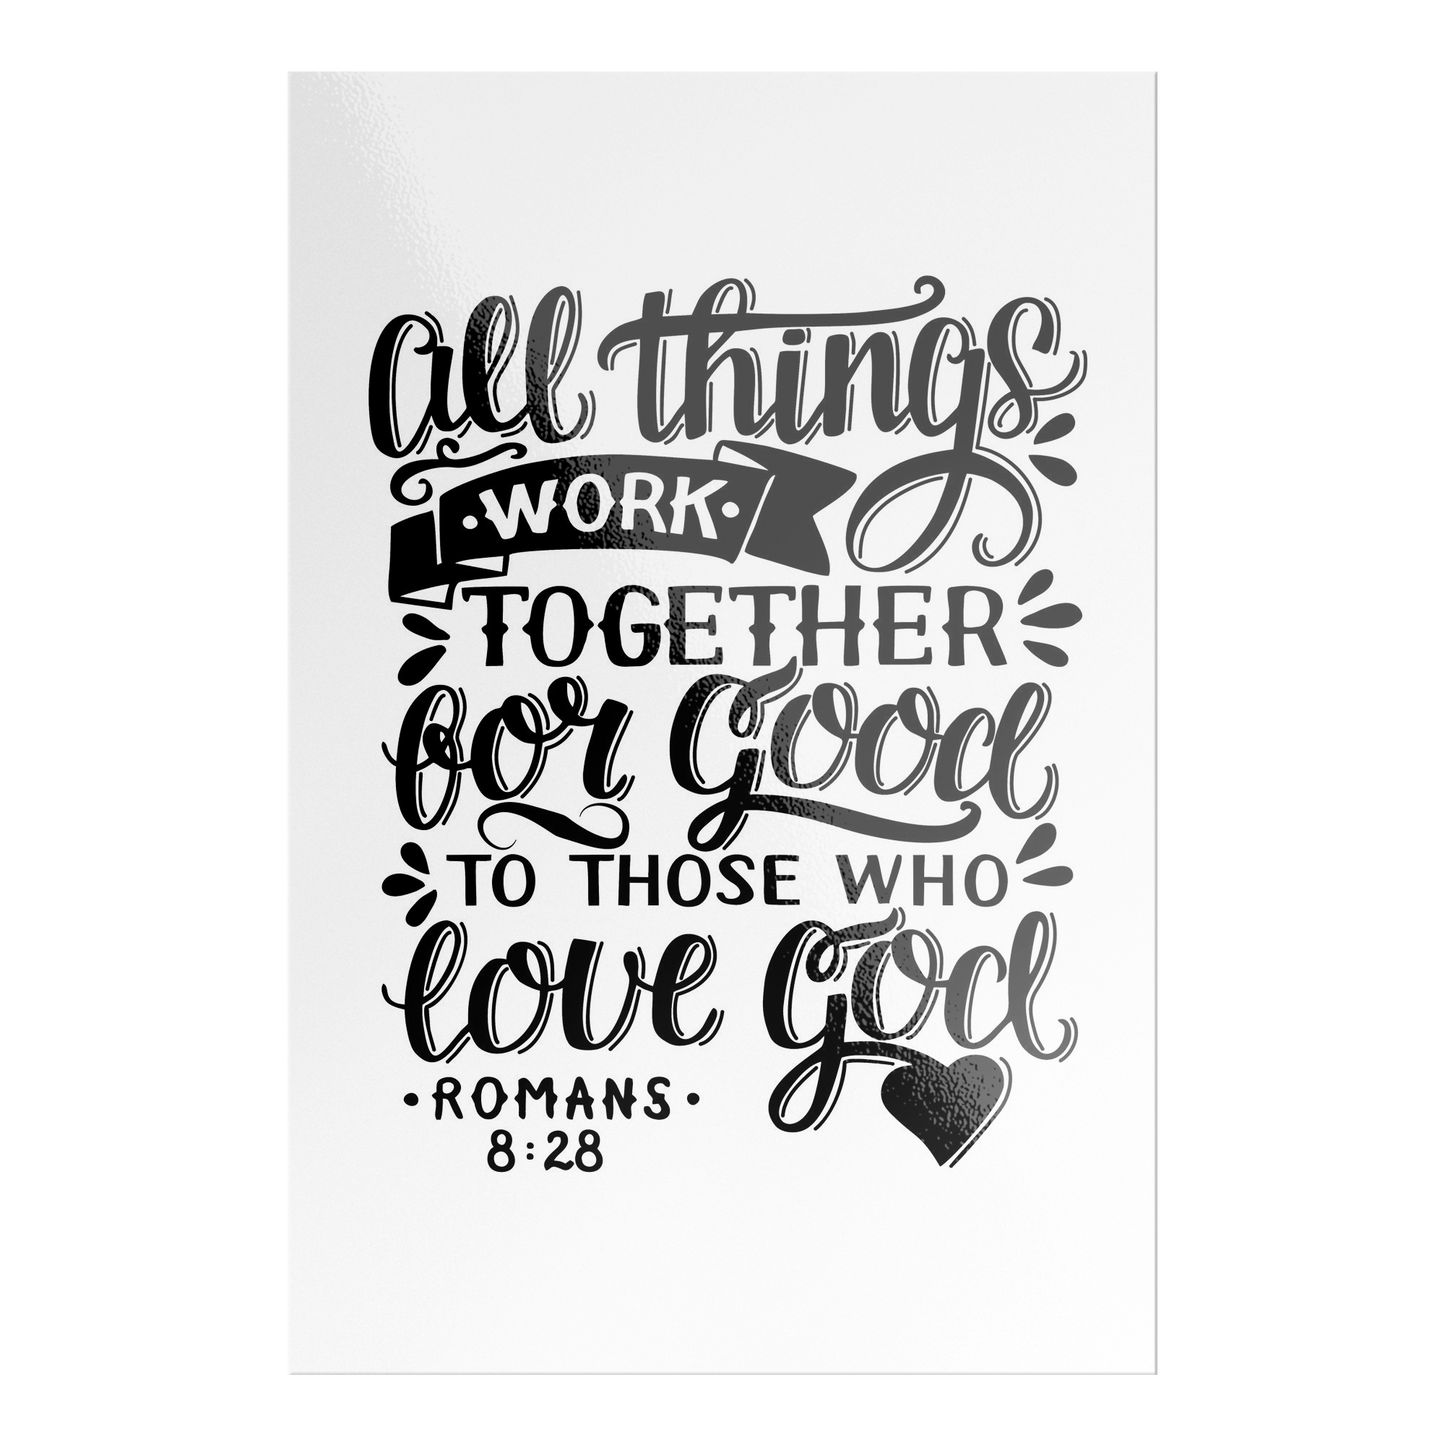 All Things Work Together For Good To Those Who Love God, Romans 8:28 - Black on White Rectangle Sticker flat